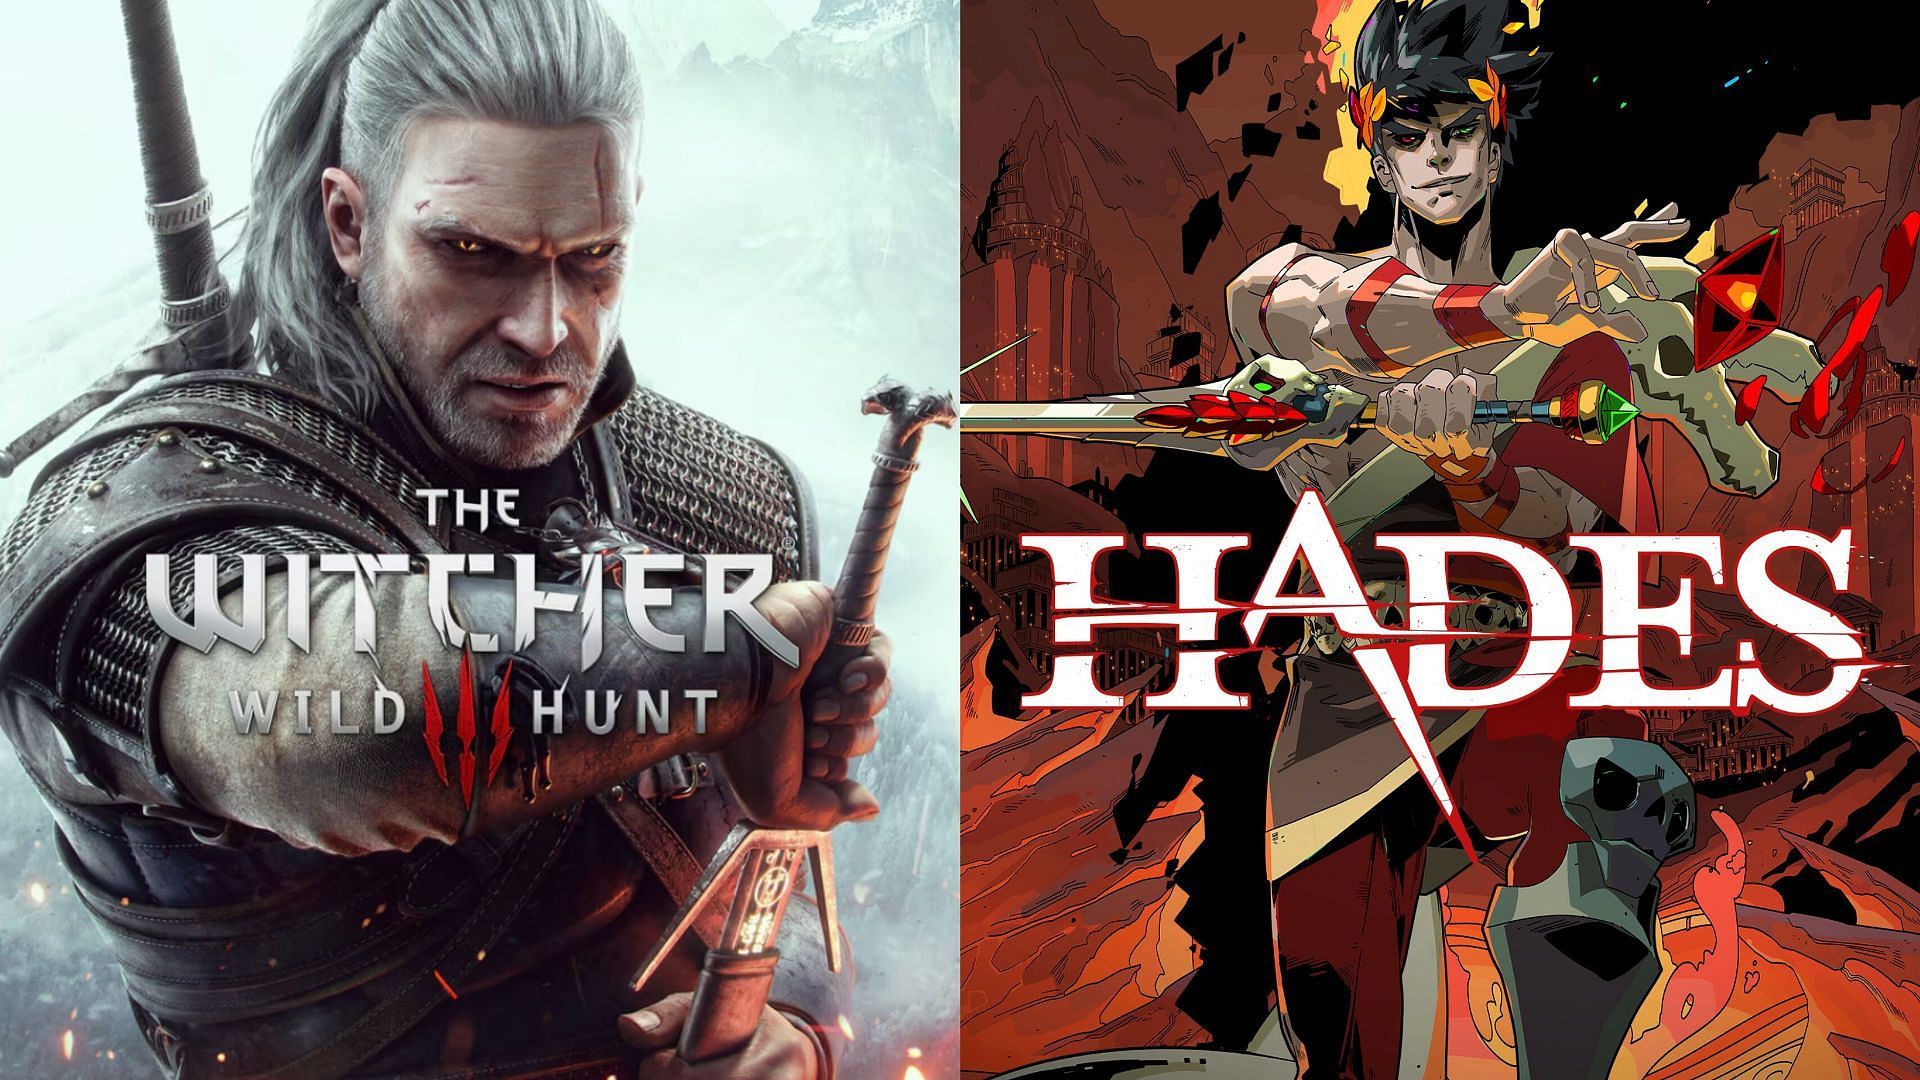 Witcher 3 and Hades promotional image